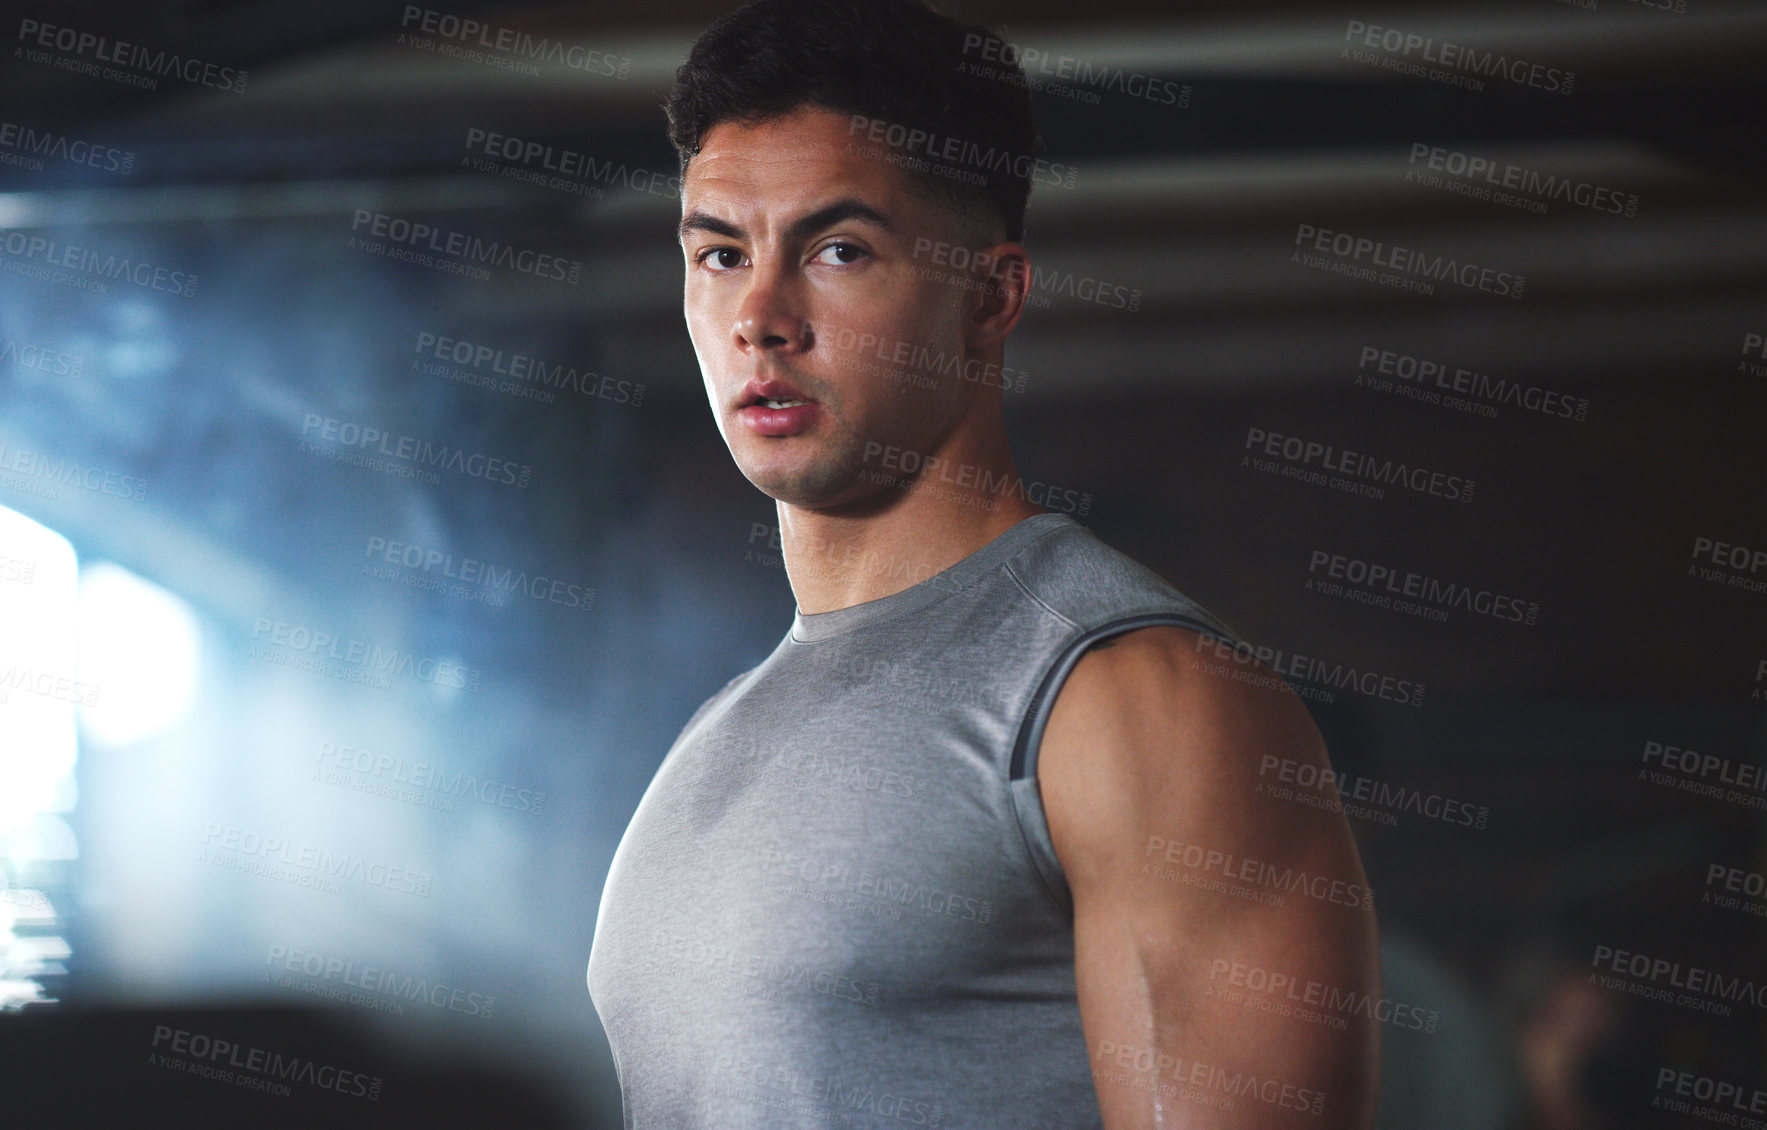 Buy stock photo Portrait of a sporty young man exercising at the gym